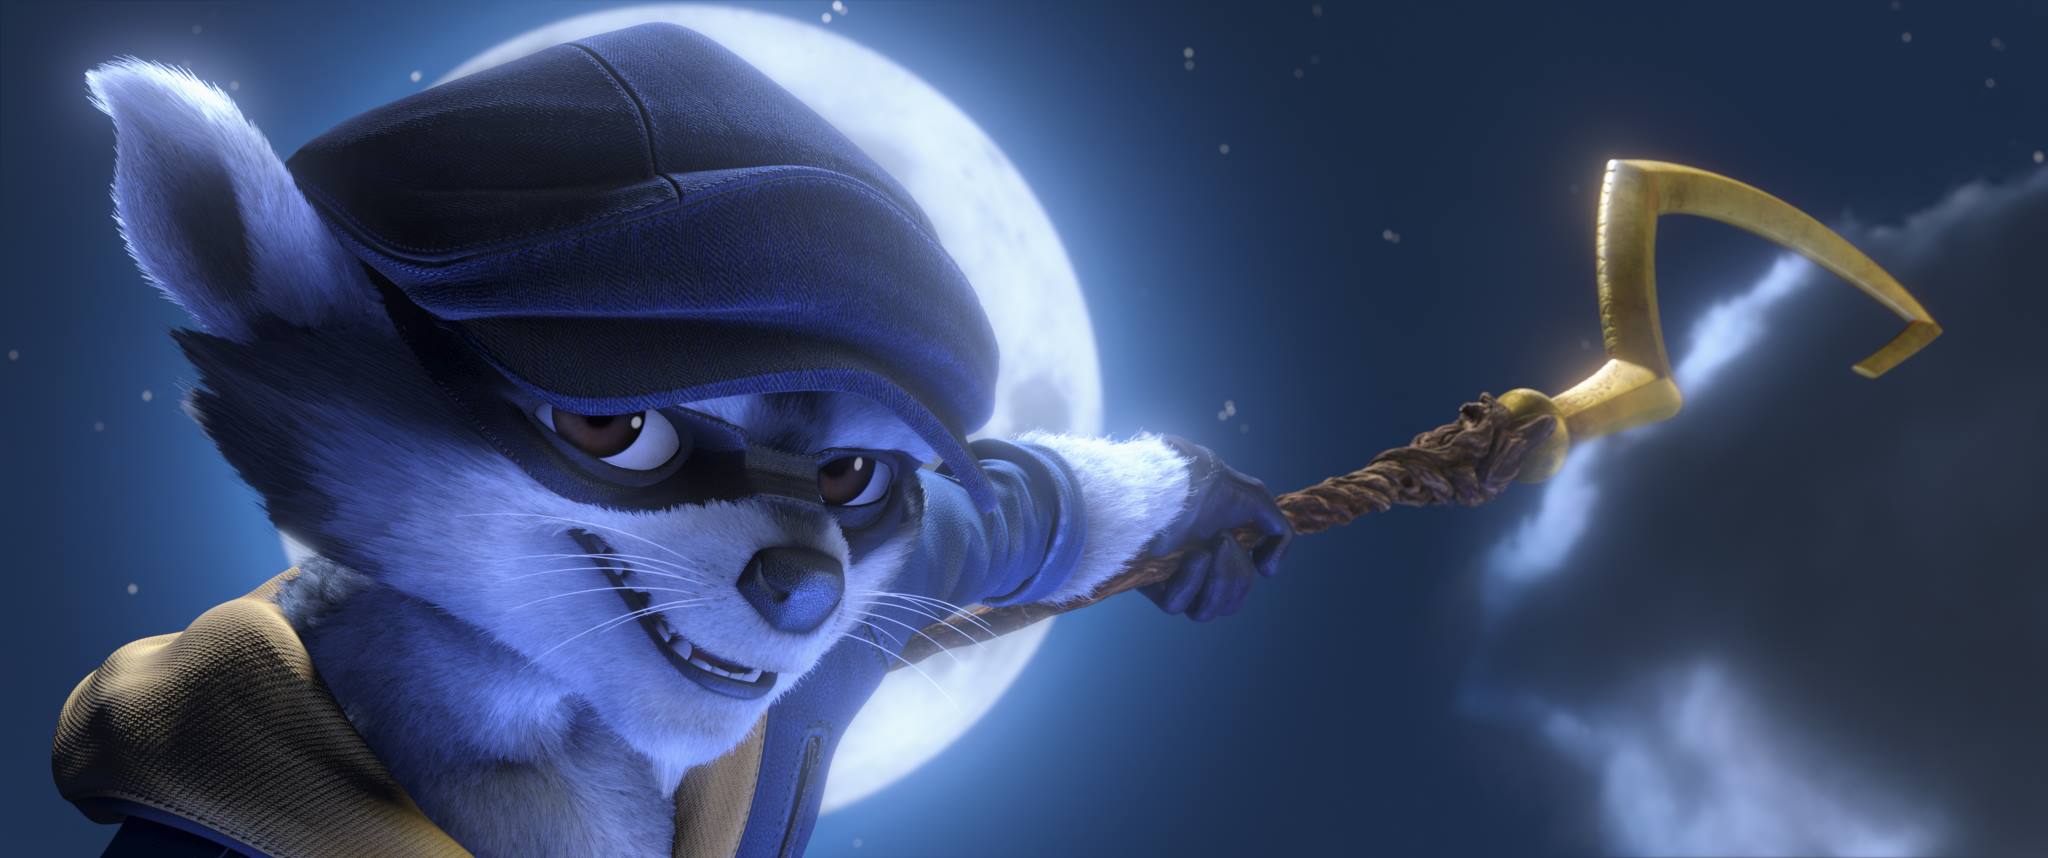 Sly Cooper Movie Wallpaper